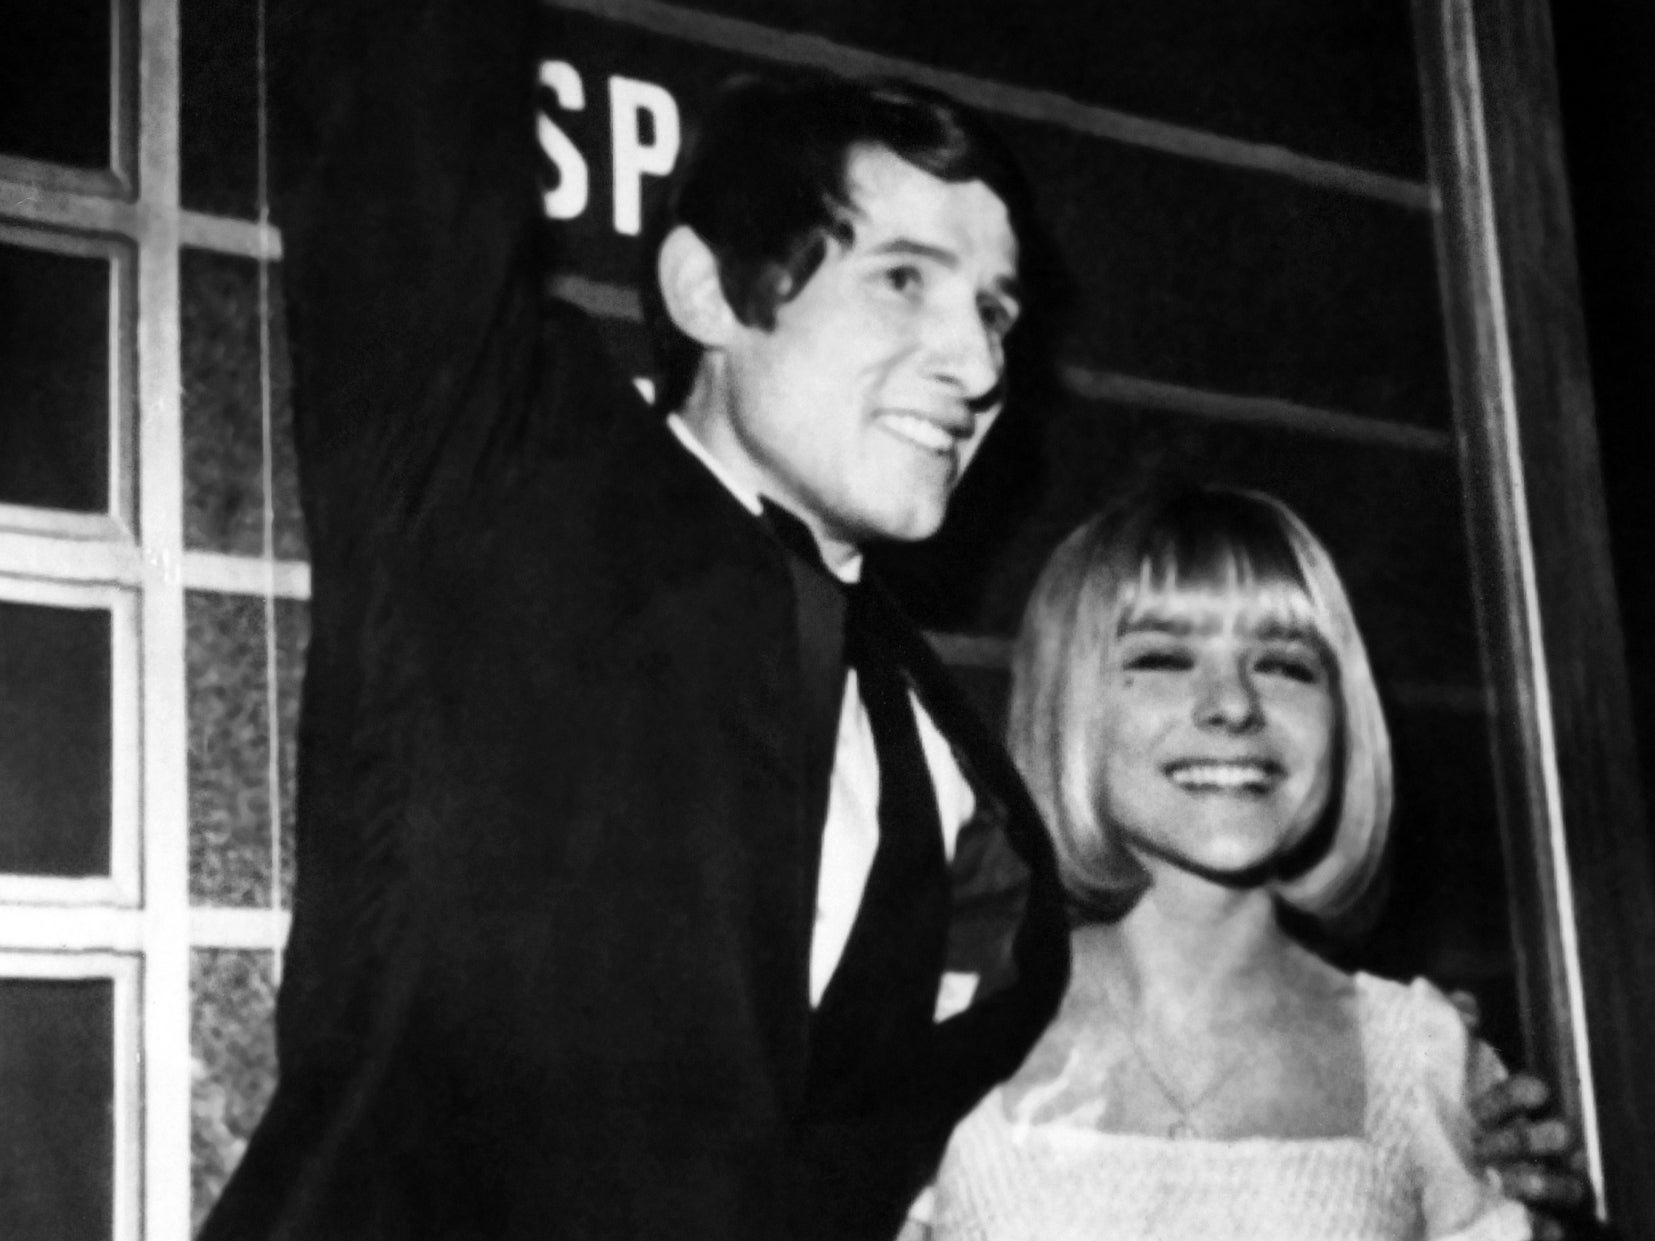 1966 winner Udo Jürgens is congratulated by 1965 winner France Gall